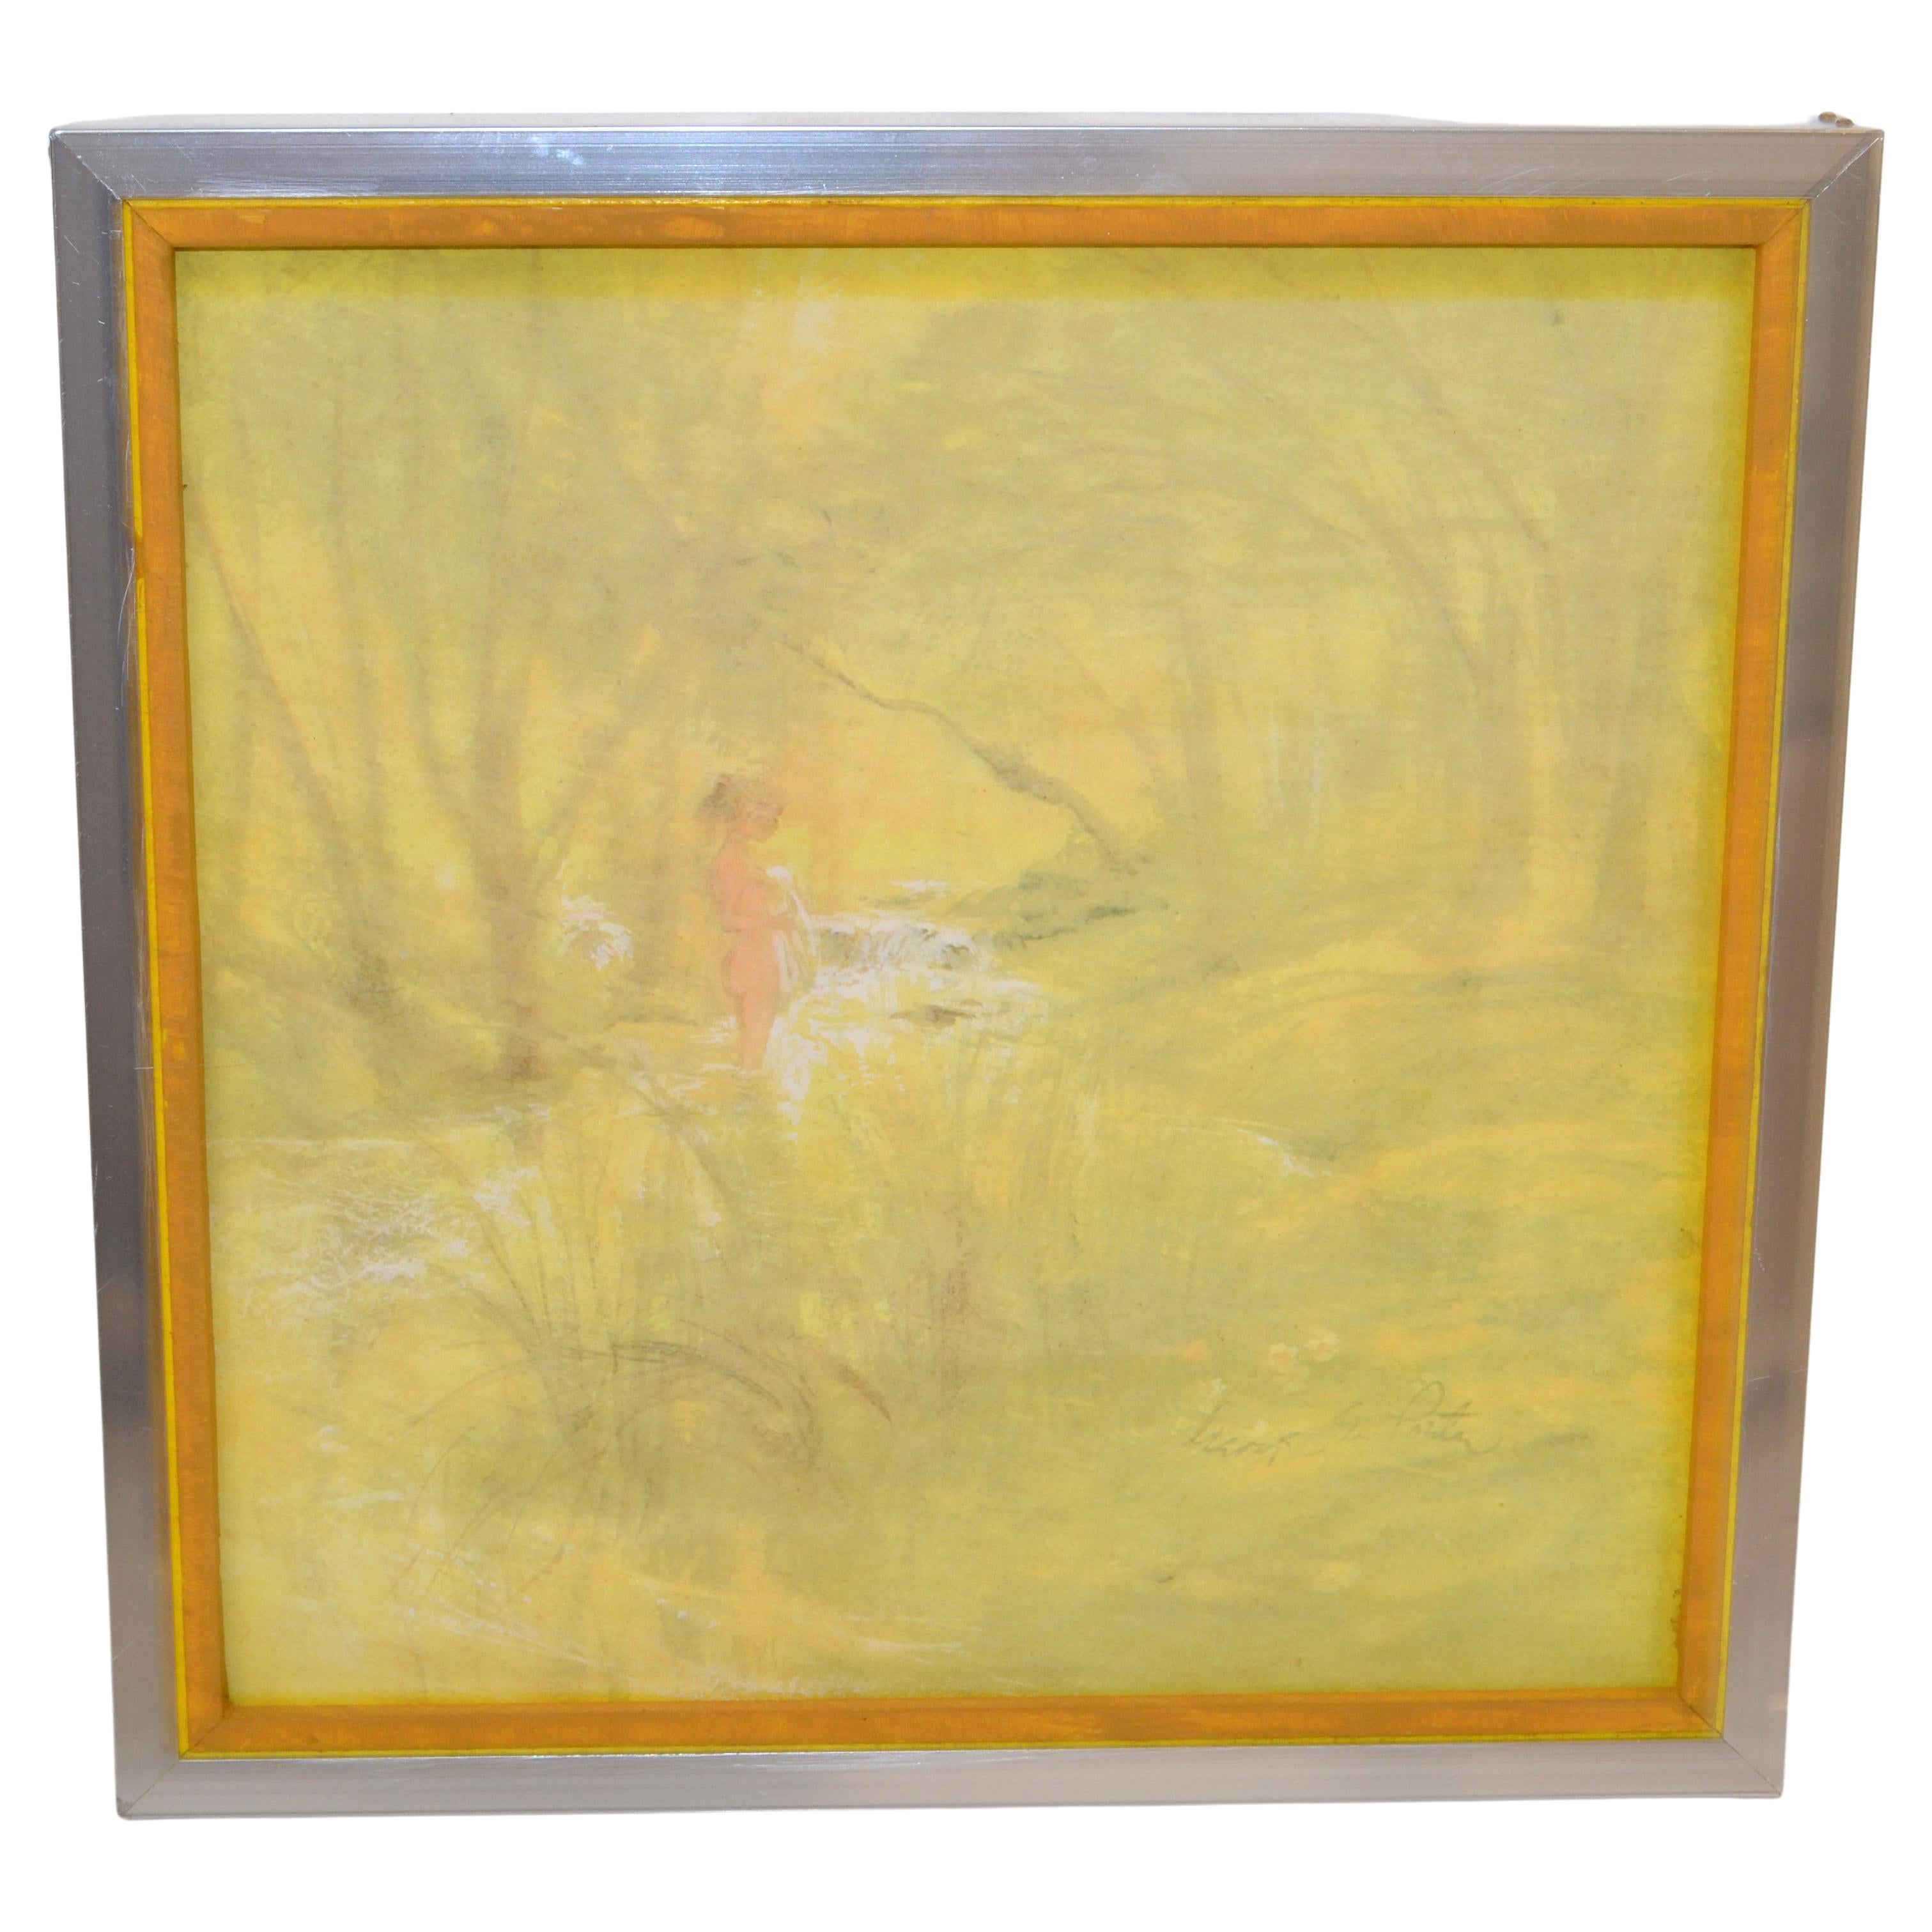 Chrome Framed Canvas on Board Watercolor Painting Bathing Girl Hues of Yellow